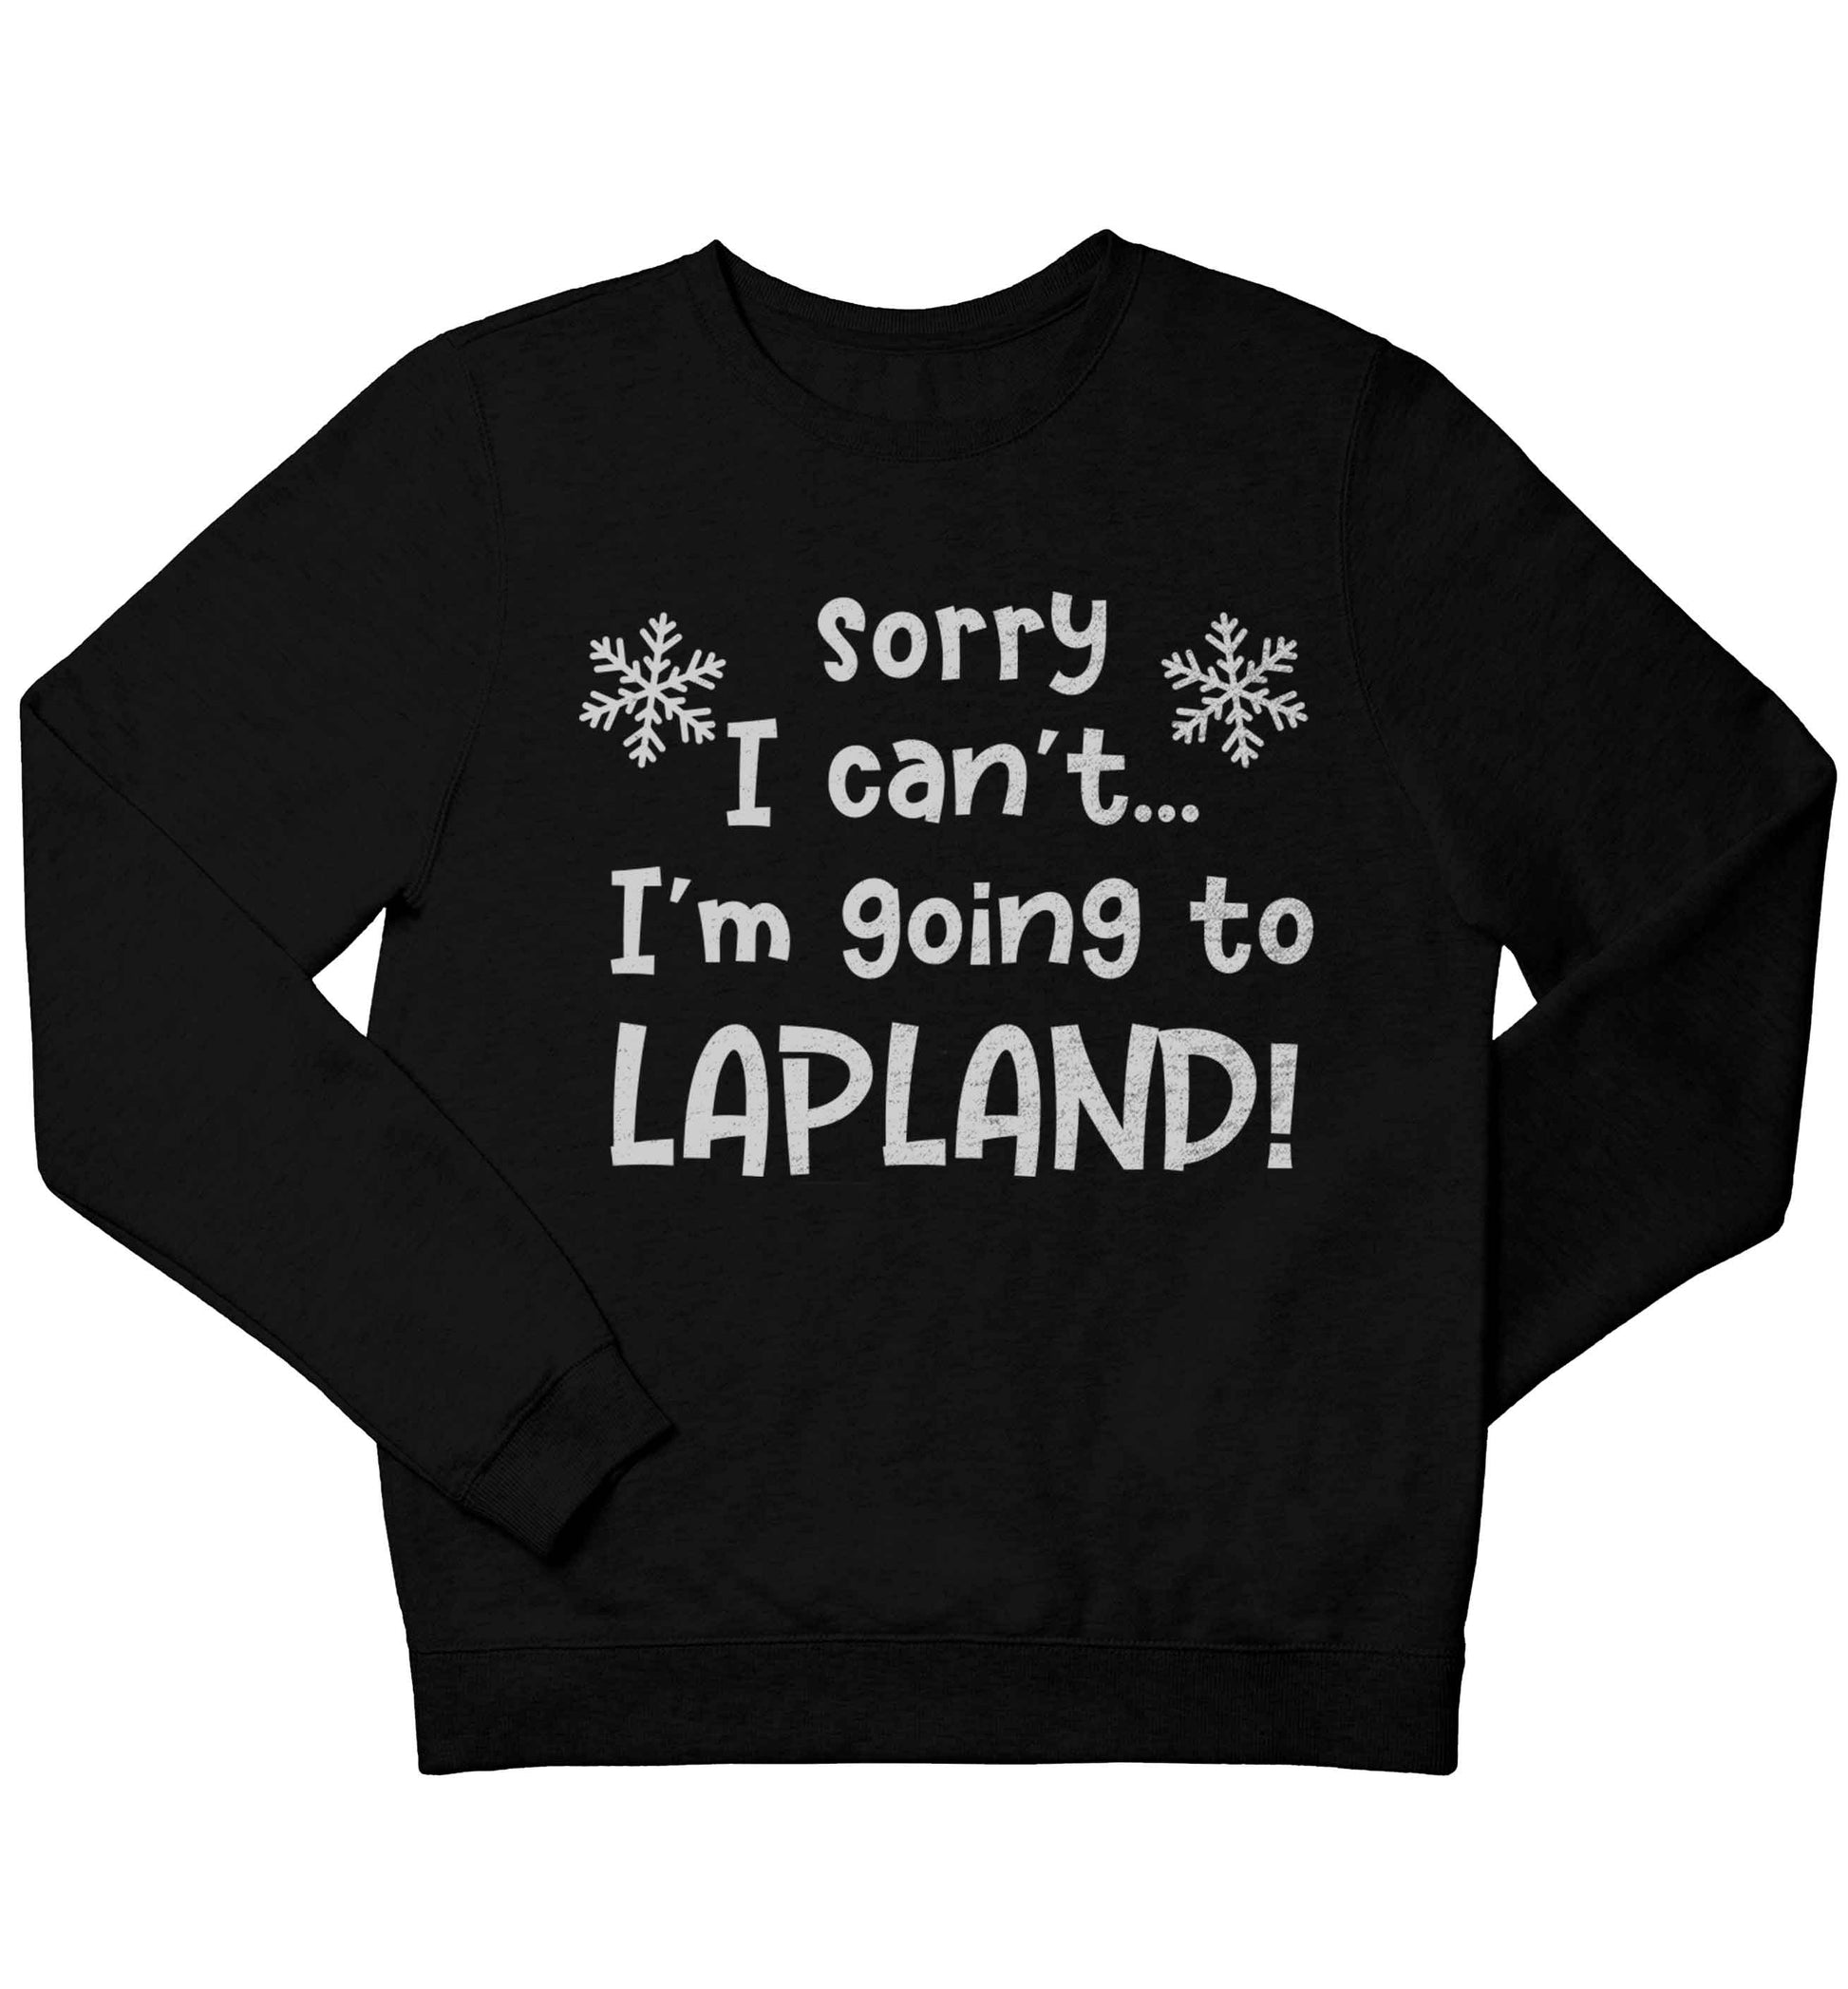 Sorry I can't I'm going to Lapland children's black sweater 12-13 Years